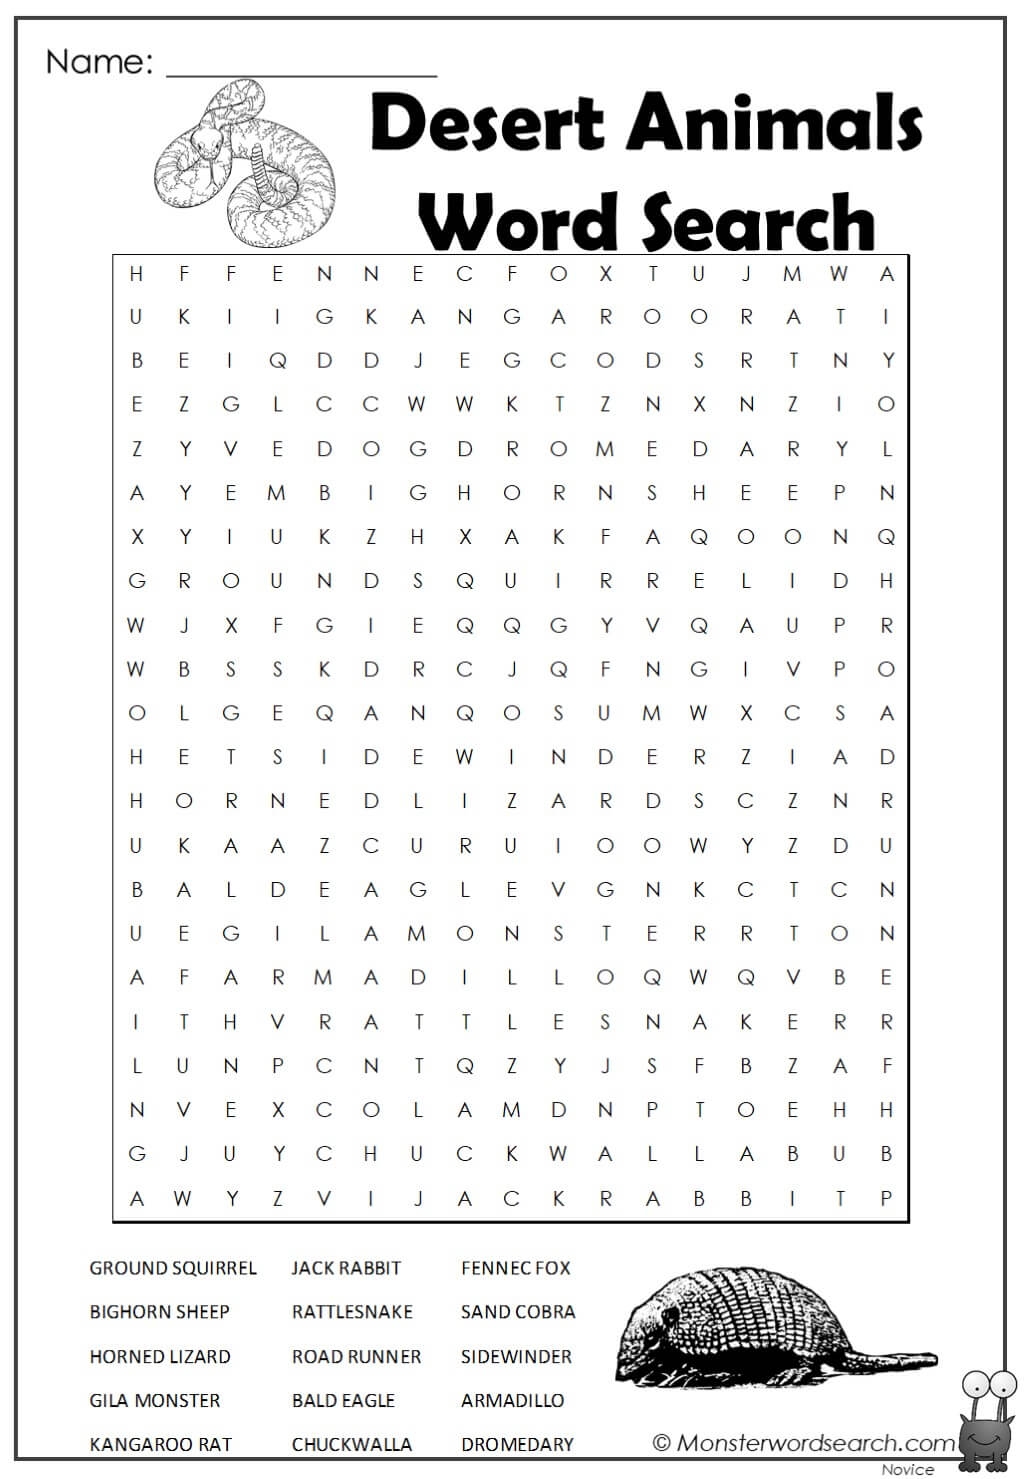 Desert Animals Word Search Monster Word Search